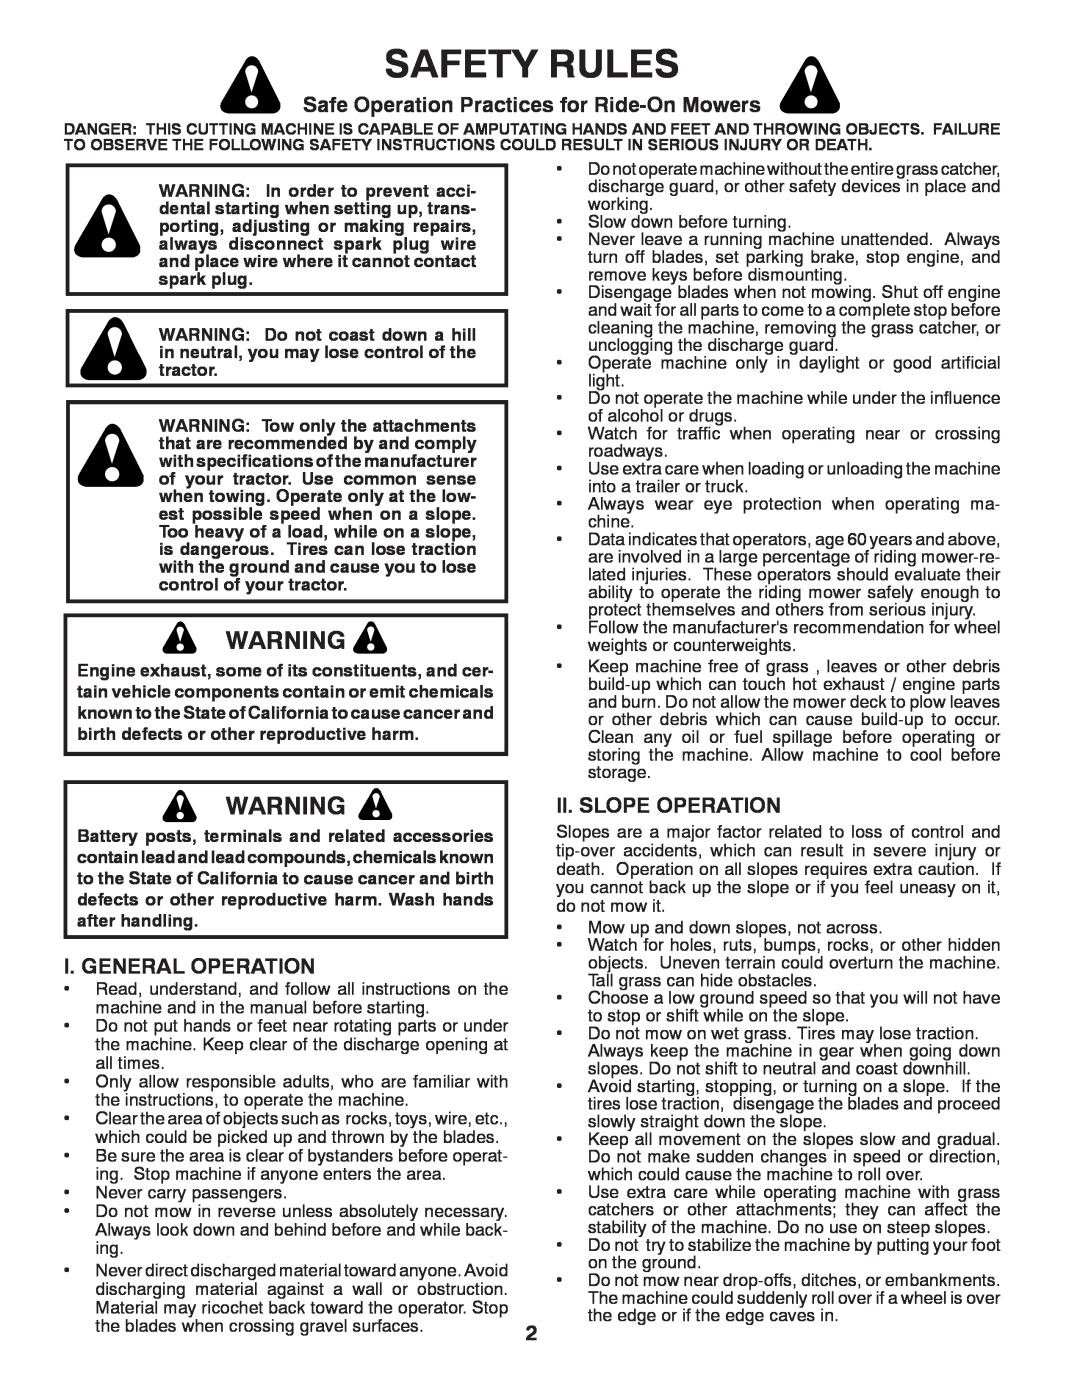 Poulan 96012008500 Safety Rules, Safe Operation Practices for Ride-On Mowers, I. General Operation, Ii. Slope Operation 